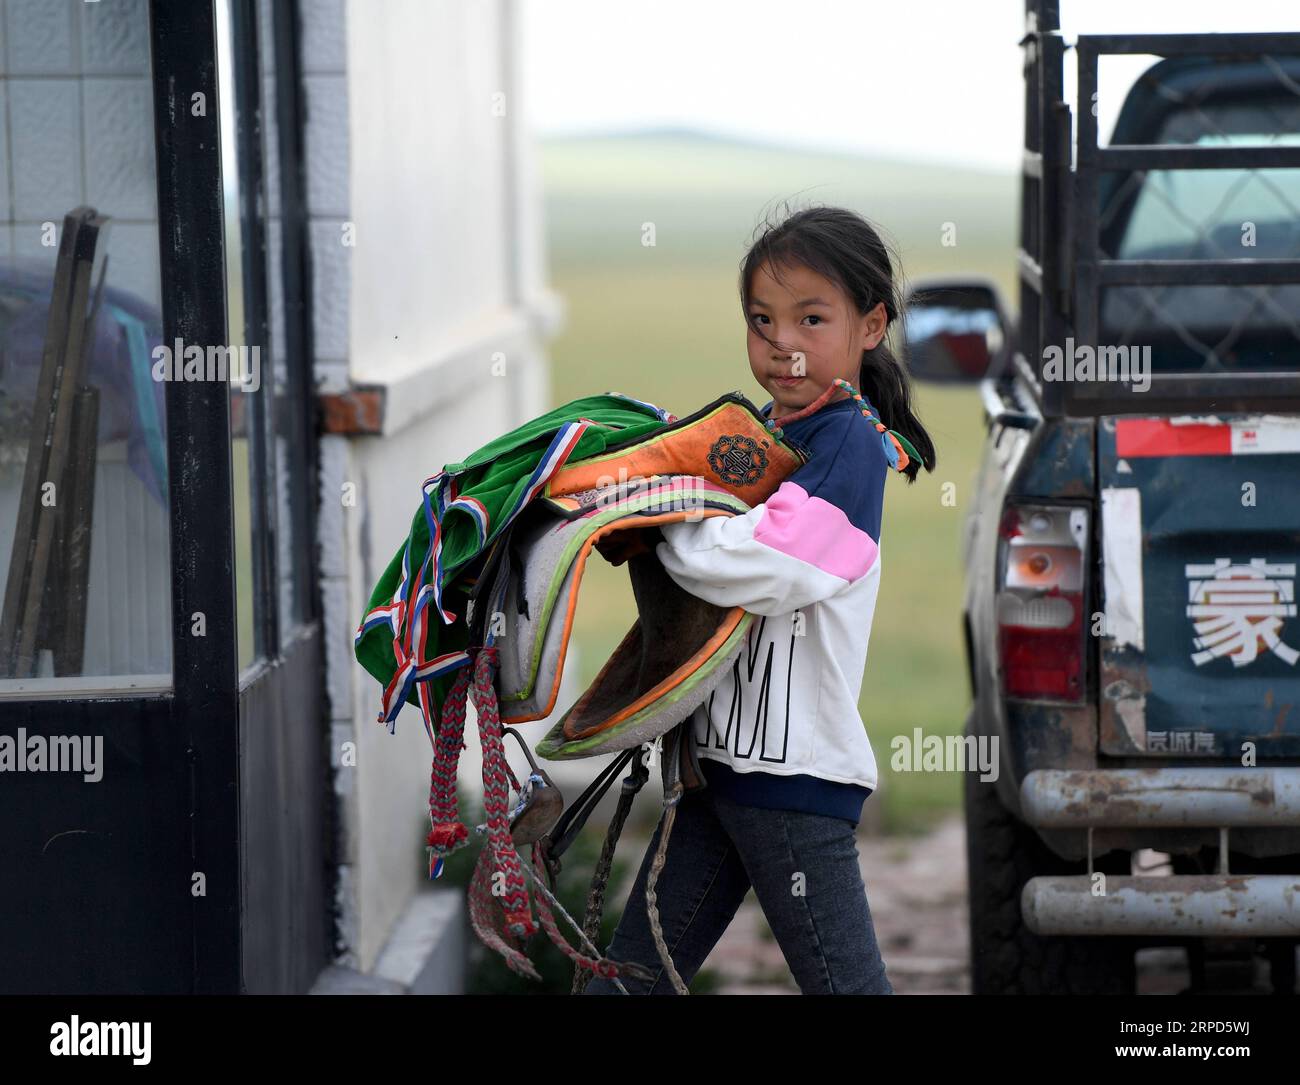 (190723) -- XILIN GOL, July 23, 2019 -- Saihanjiya carries the saddle in East Ujimqin Banner of Xilingol League, north China s Inner Mongolia Autonomous Region, July 20, 2019. Saihanjiya, 10, a well-known young jockey in local town, has a tight schedule for attending various kinds of horse racing in this summer vacation as she really enjoys the speedy riding. Influenced by her father who is a horse trainer, Saihanjiya learned to ride horse when she was seven. After one year of learning, Saihanjiya started to take part in horse racing and achieve good results. Not all gains are achieved without Stock Photo